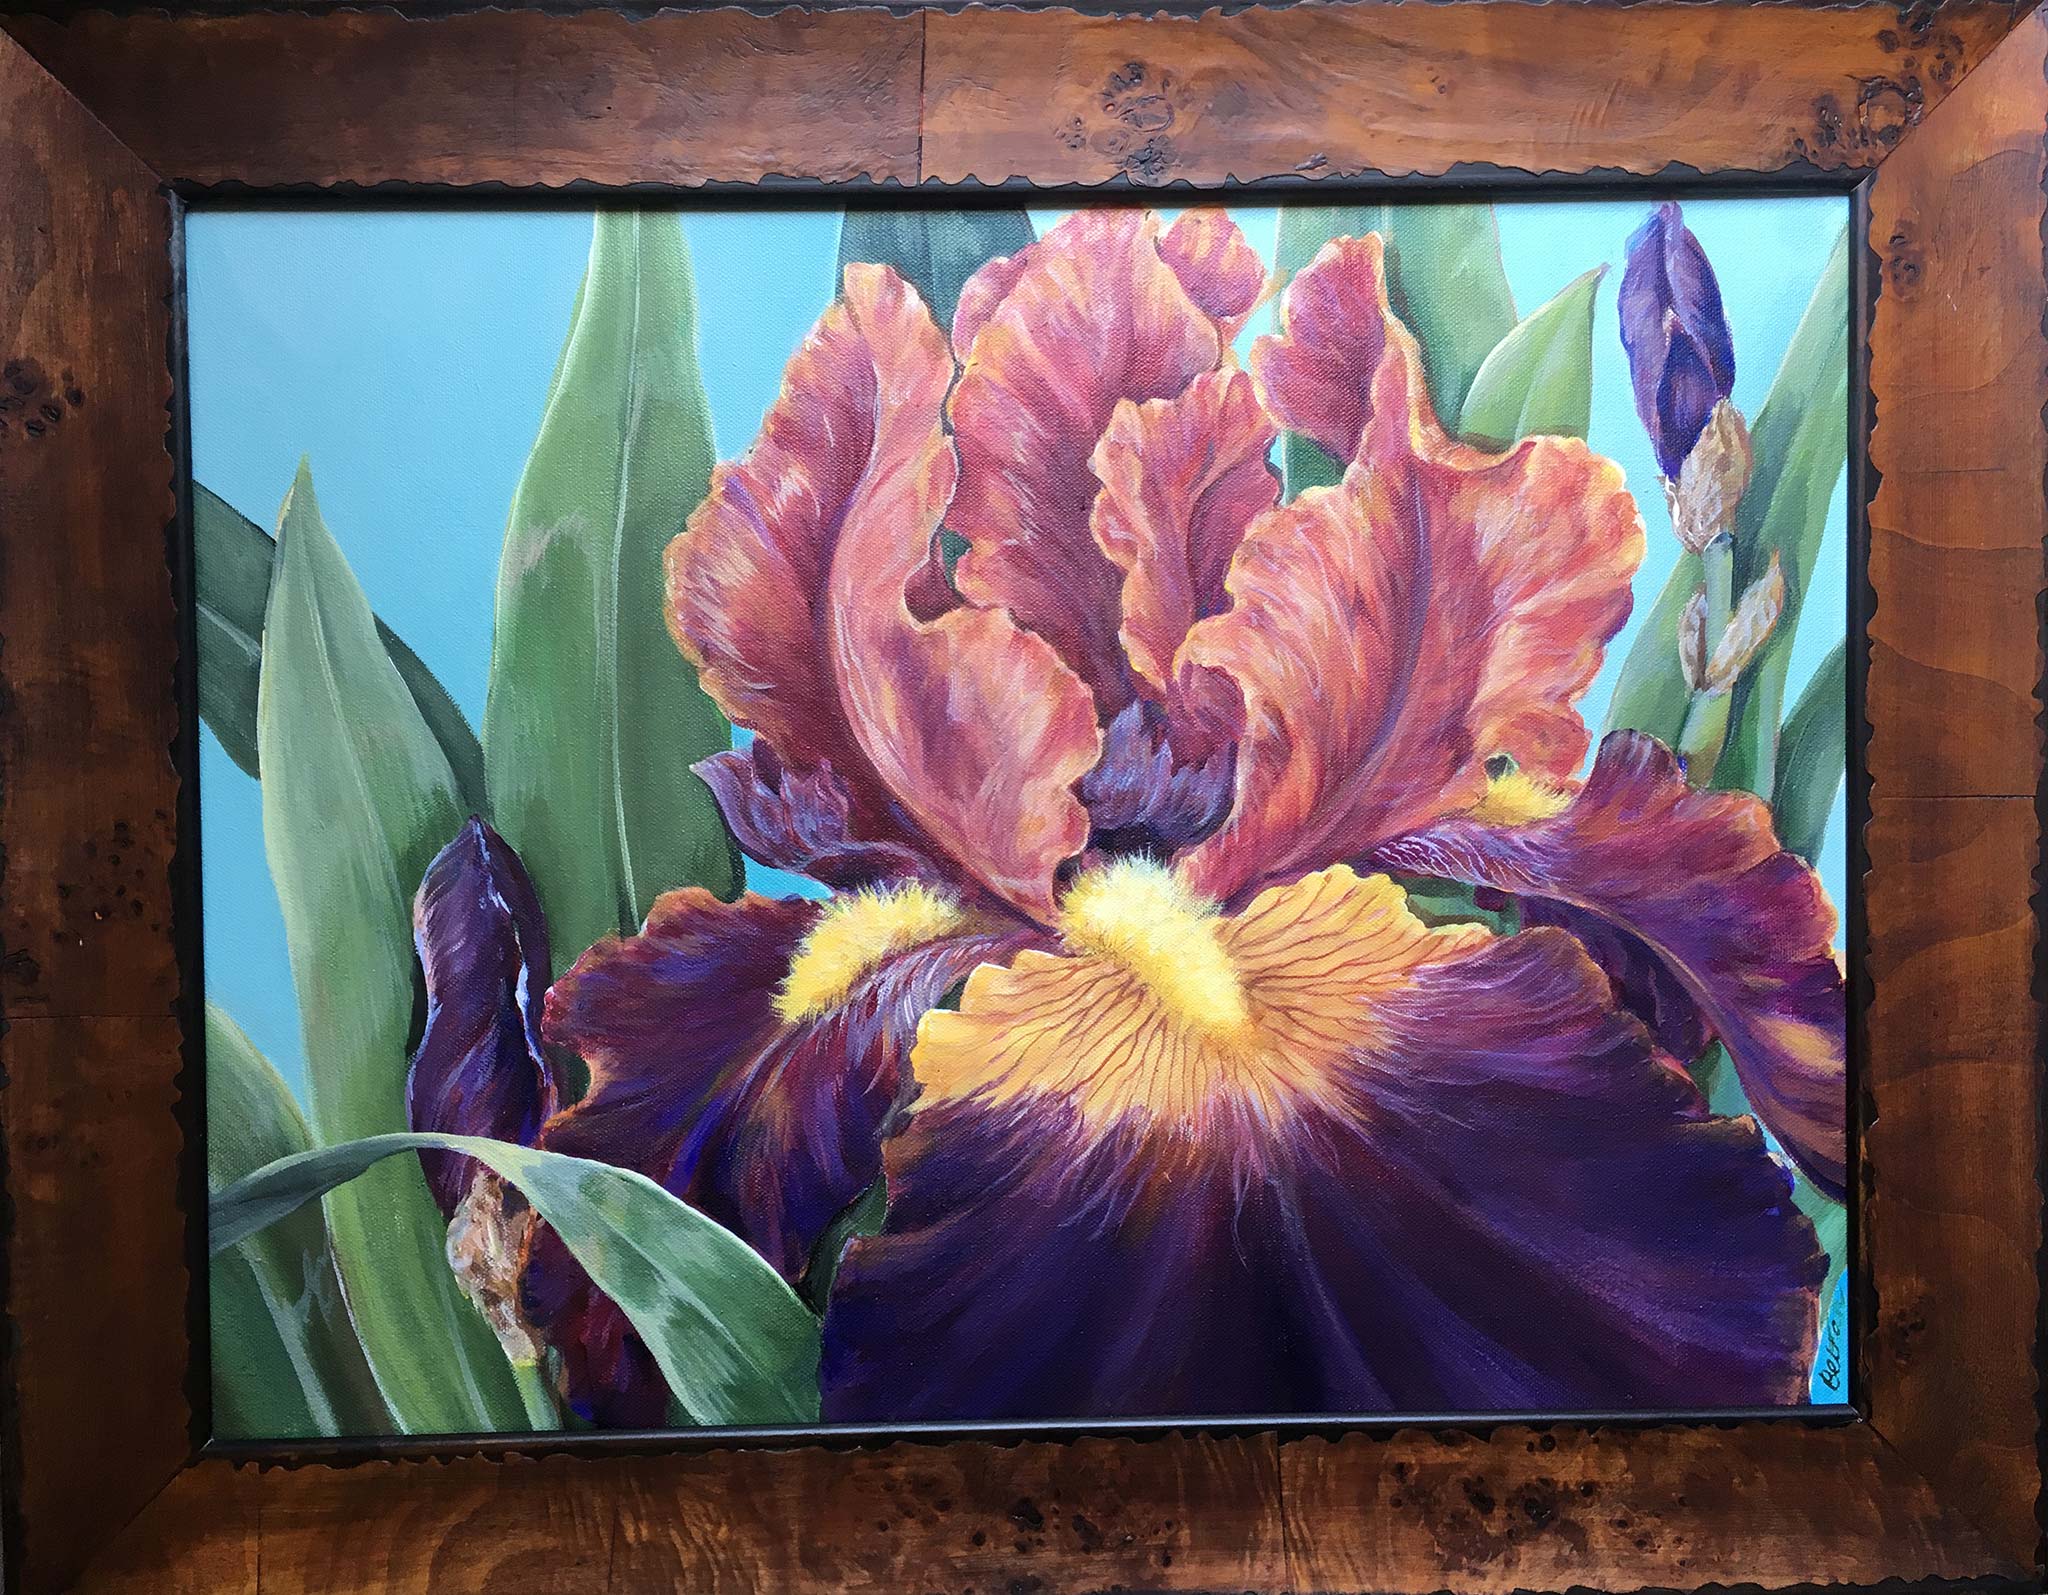 Iris Acrylic Painting 18" x 24" with Wooden Frame